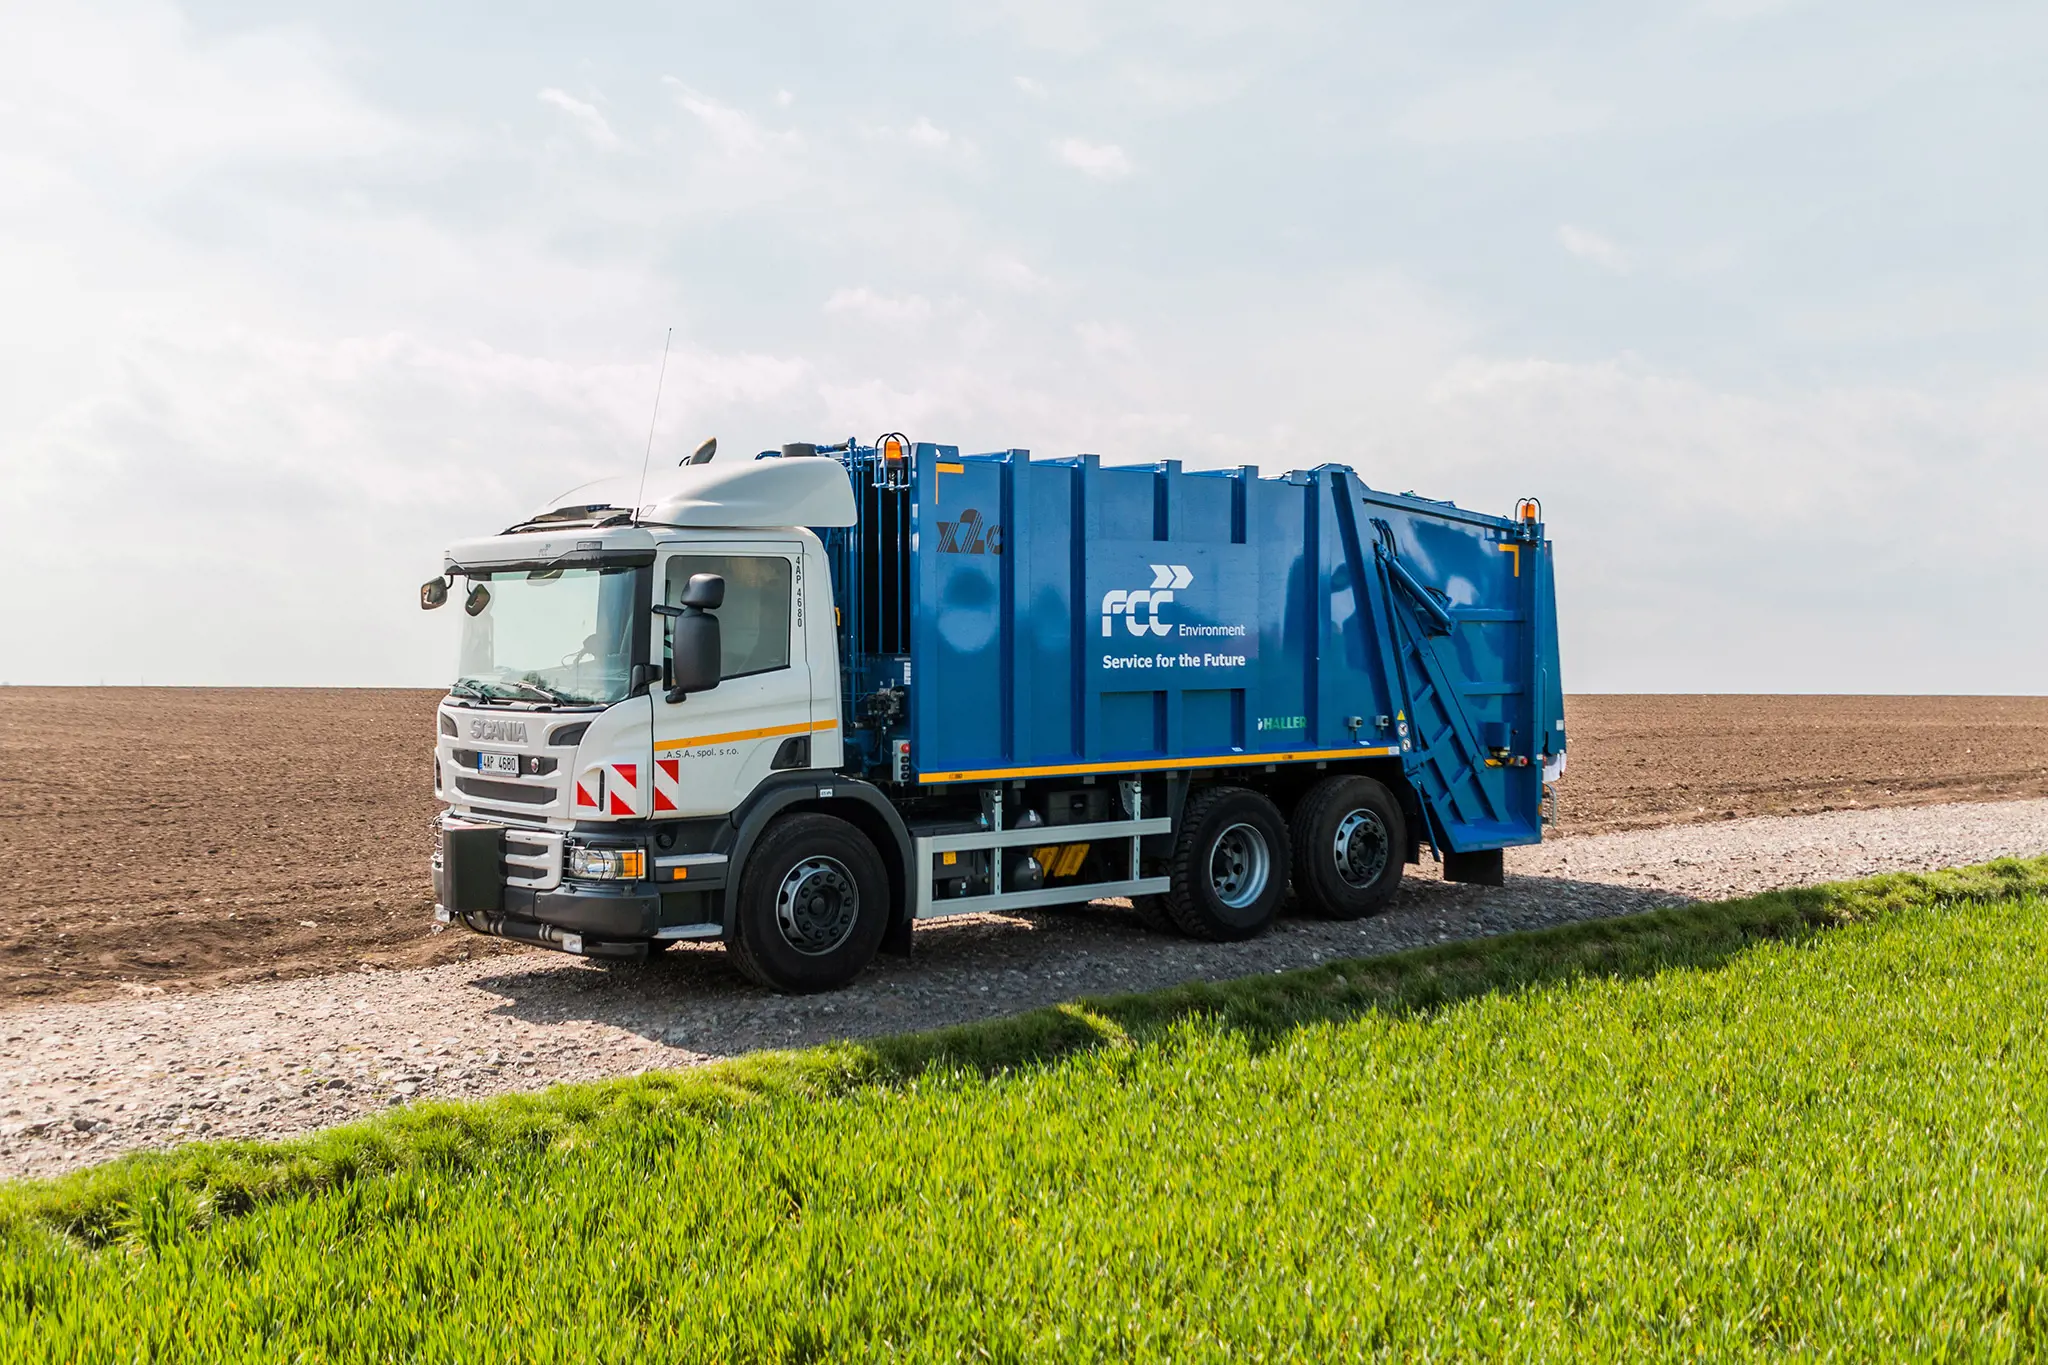 Collection, transport, separation and disposal of municipal waste